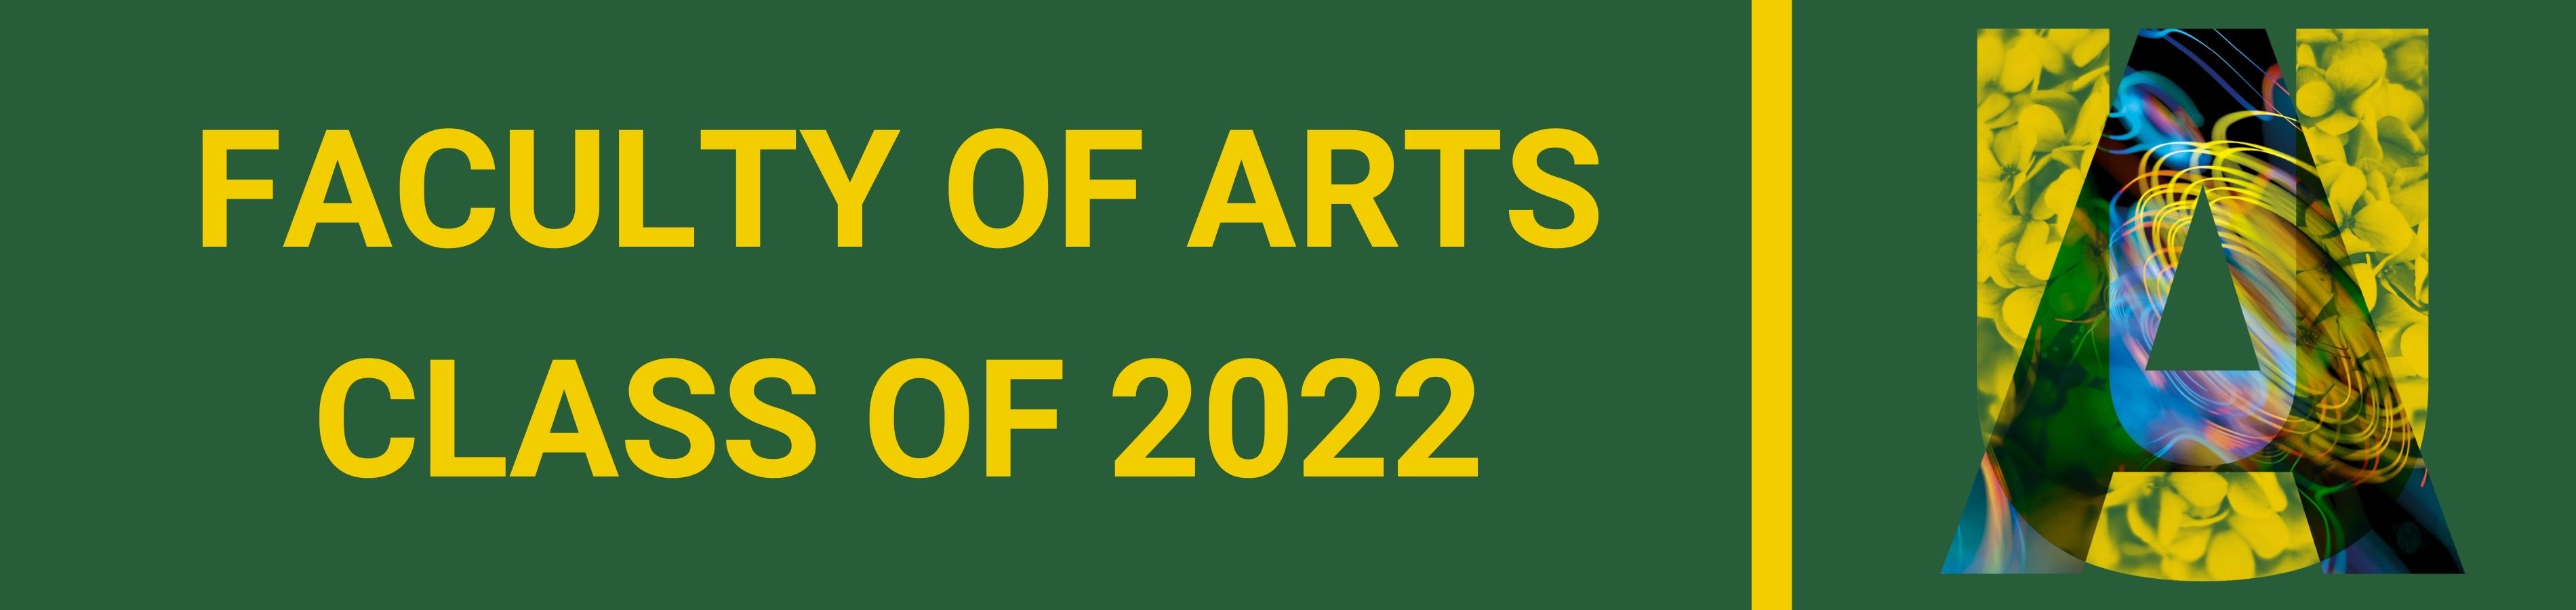 Faculty of Arts Class of 2022